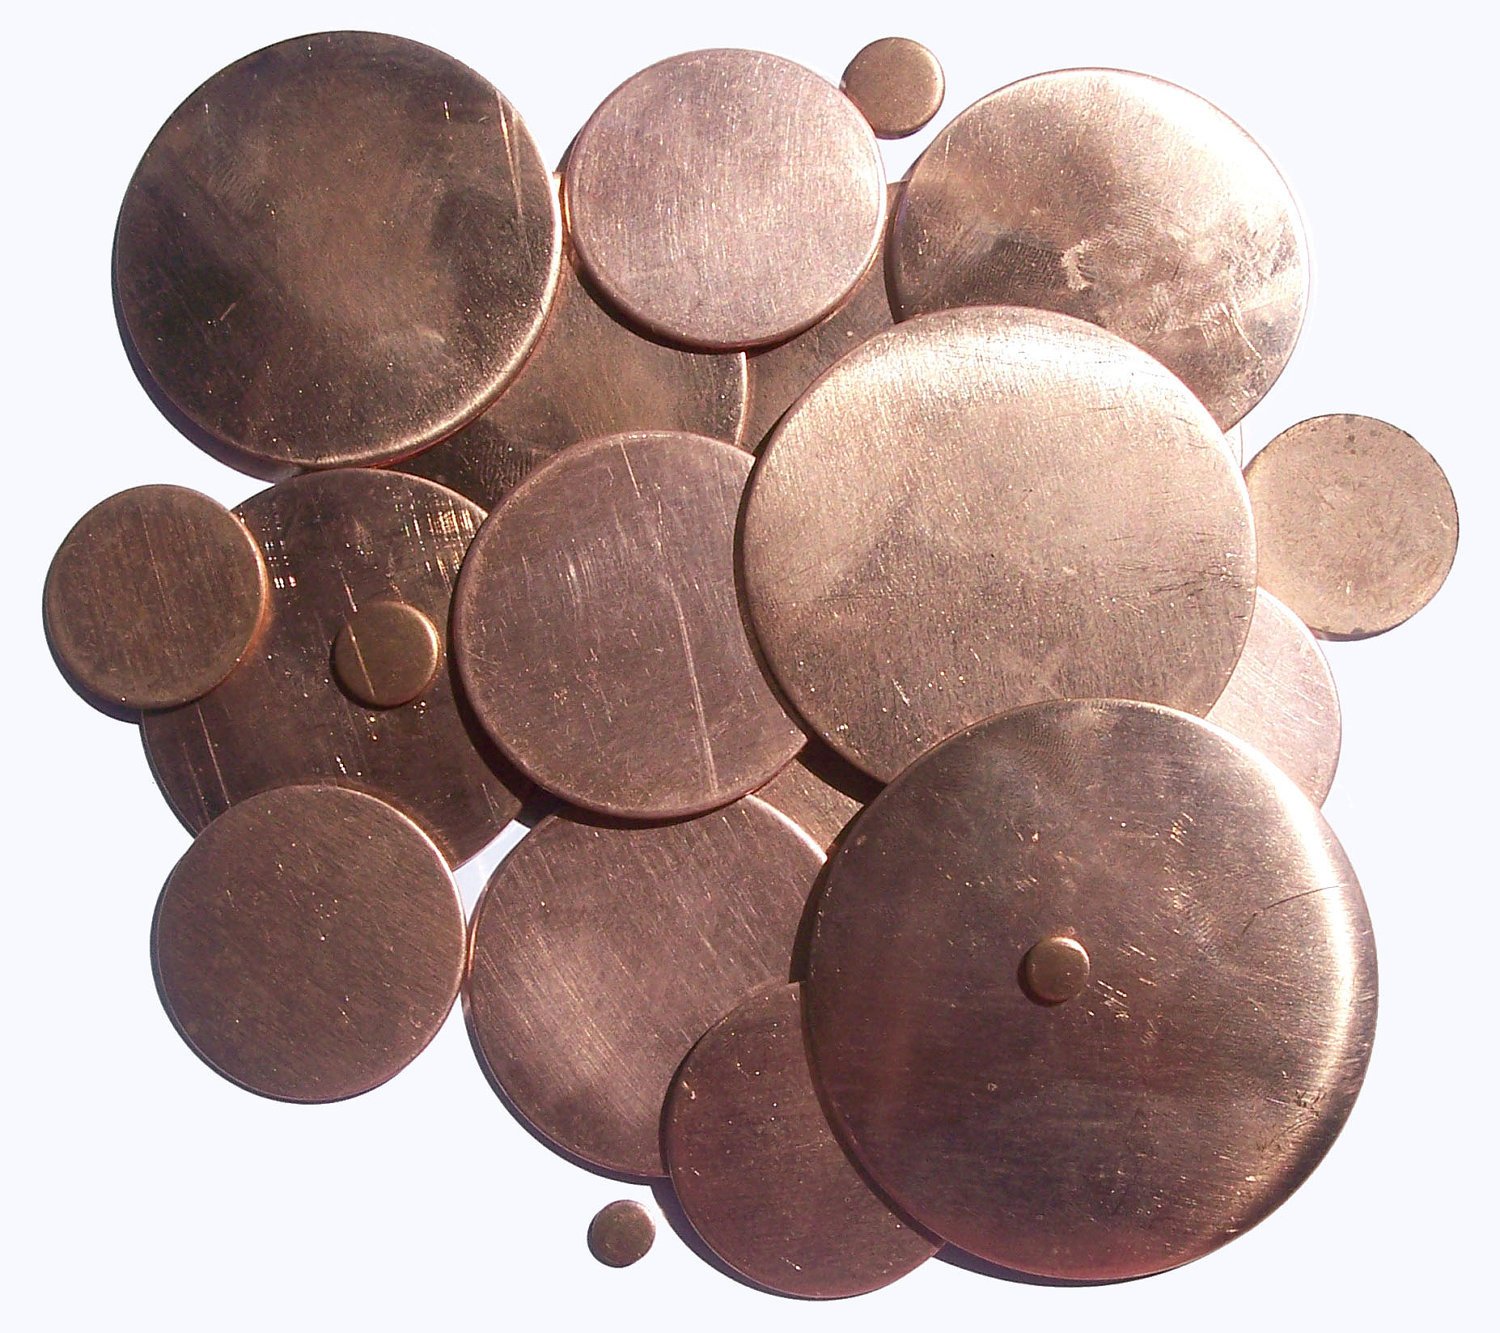 40mm Blank Disc 20G, Metalworking Supplies, Enameling Stamping Texturing Blank - 1 9/16 inch - 4 Pieces